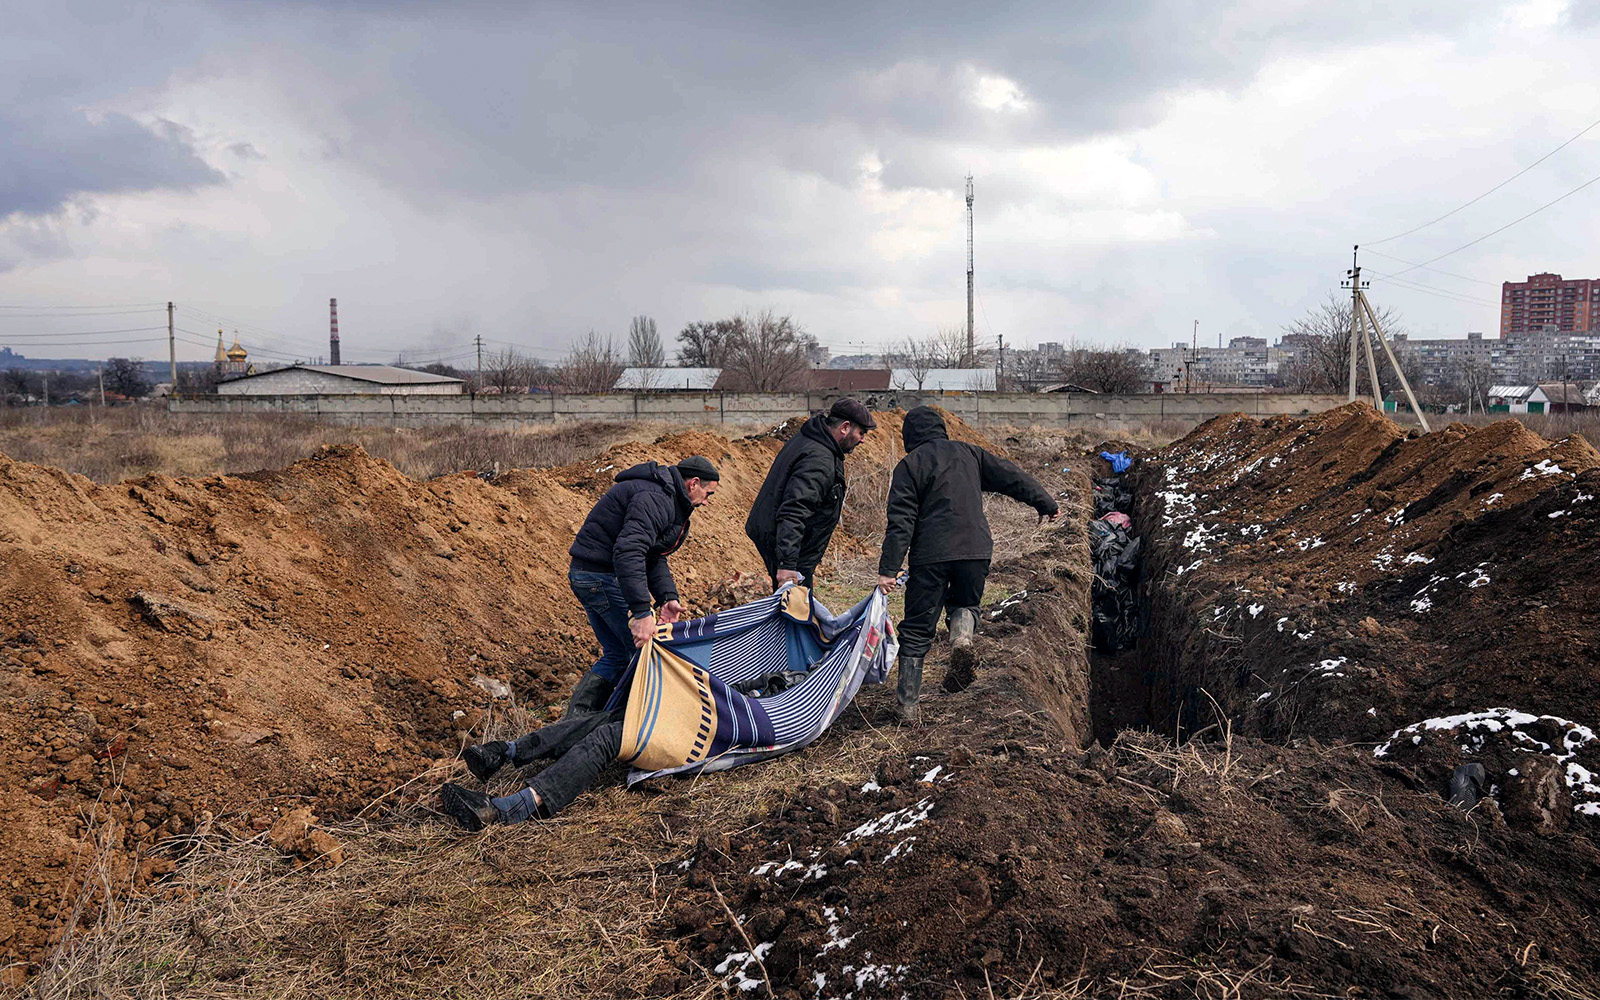 Mass graves, hunger, nowhere safe: Besieged Mariupol descends into despair  and agony | The Times of Israel